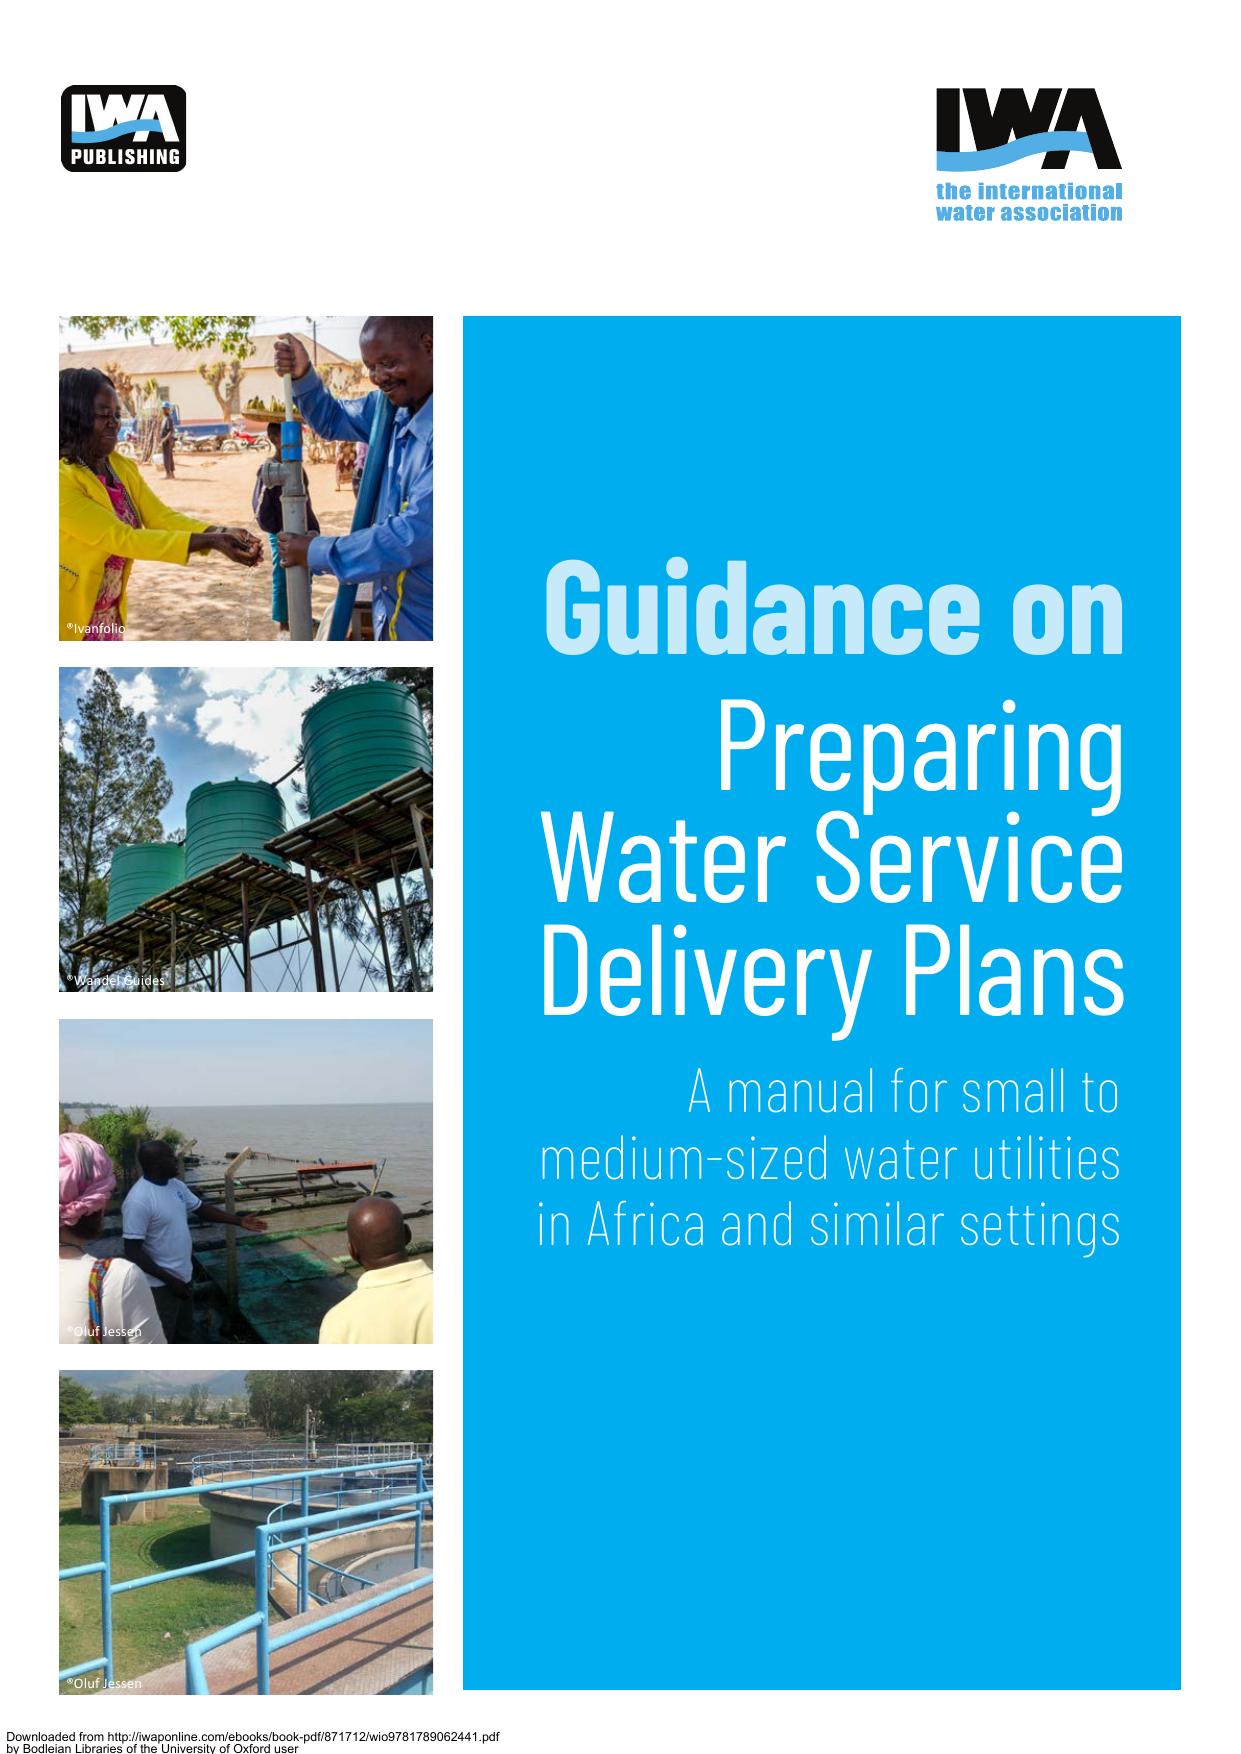 Guidance on Preparing Water Service Delivery Plans: A manual for small to medium-sized water utilities in Africa and similar settings